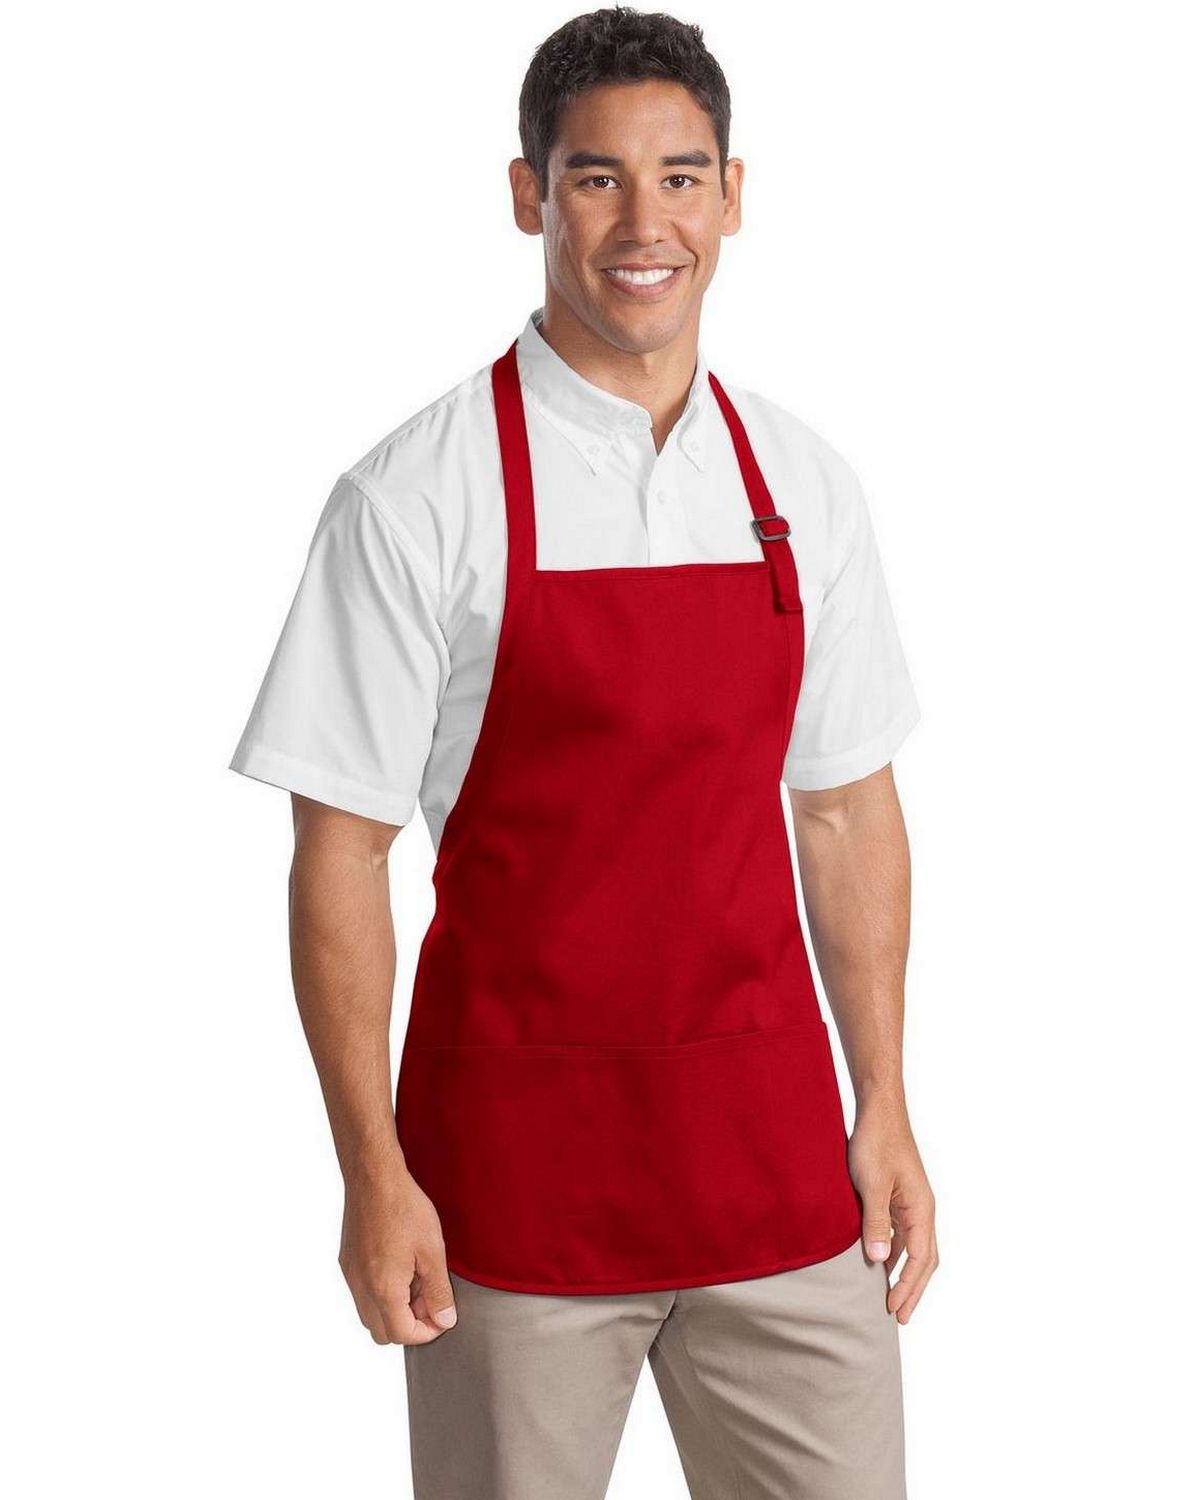 Port Authority A510 Medium Length Apron with Pouch Pockets